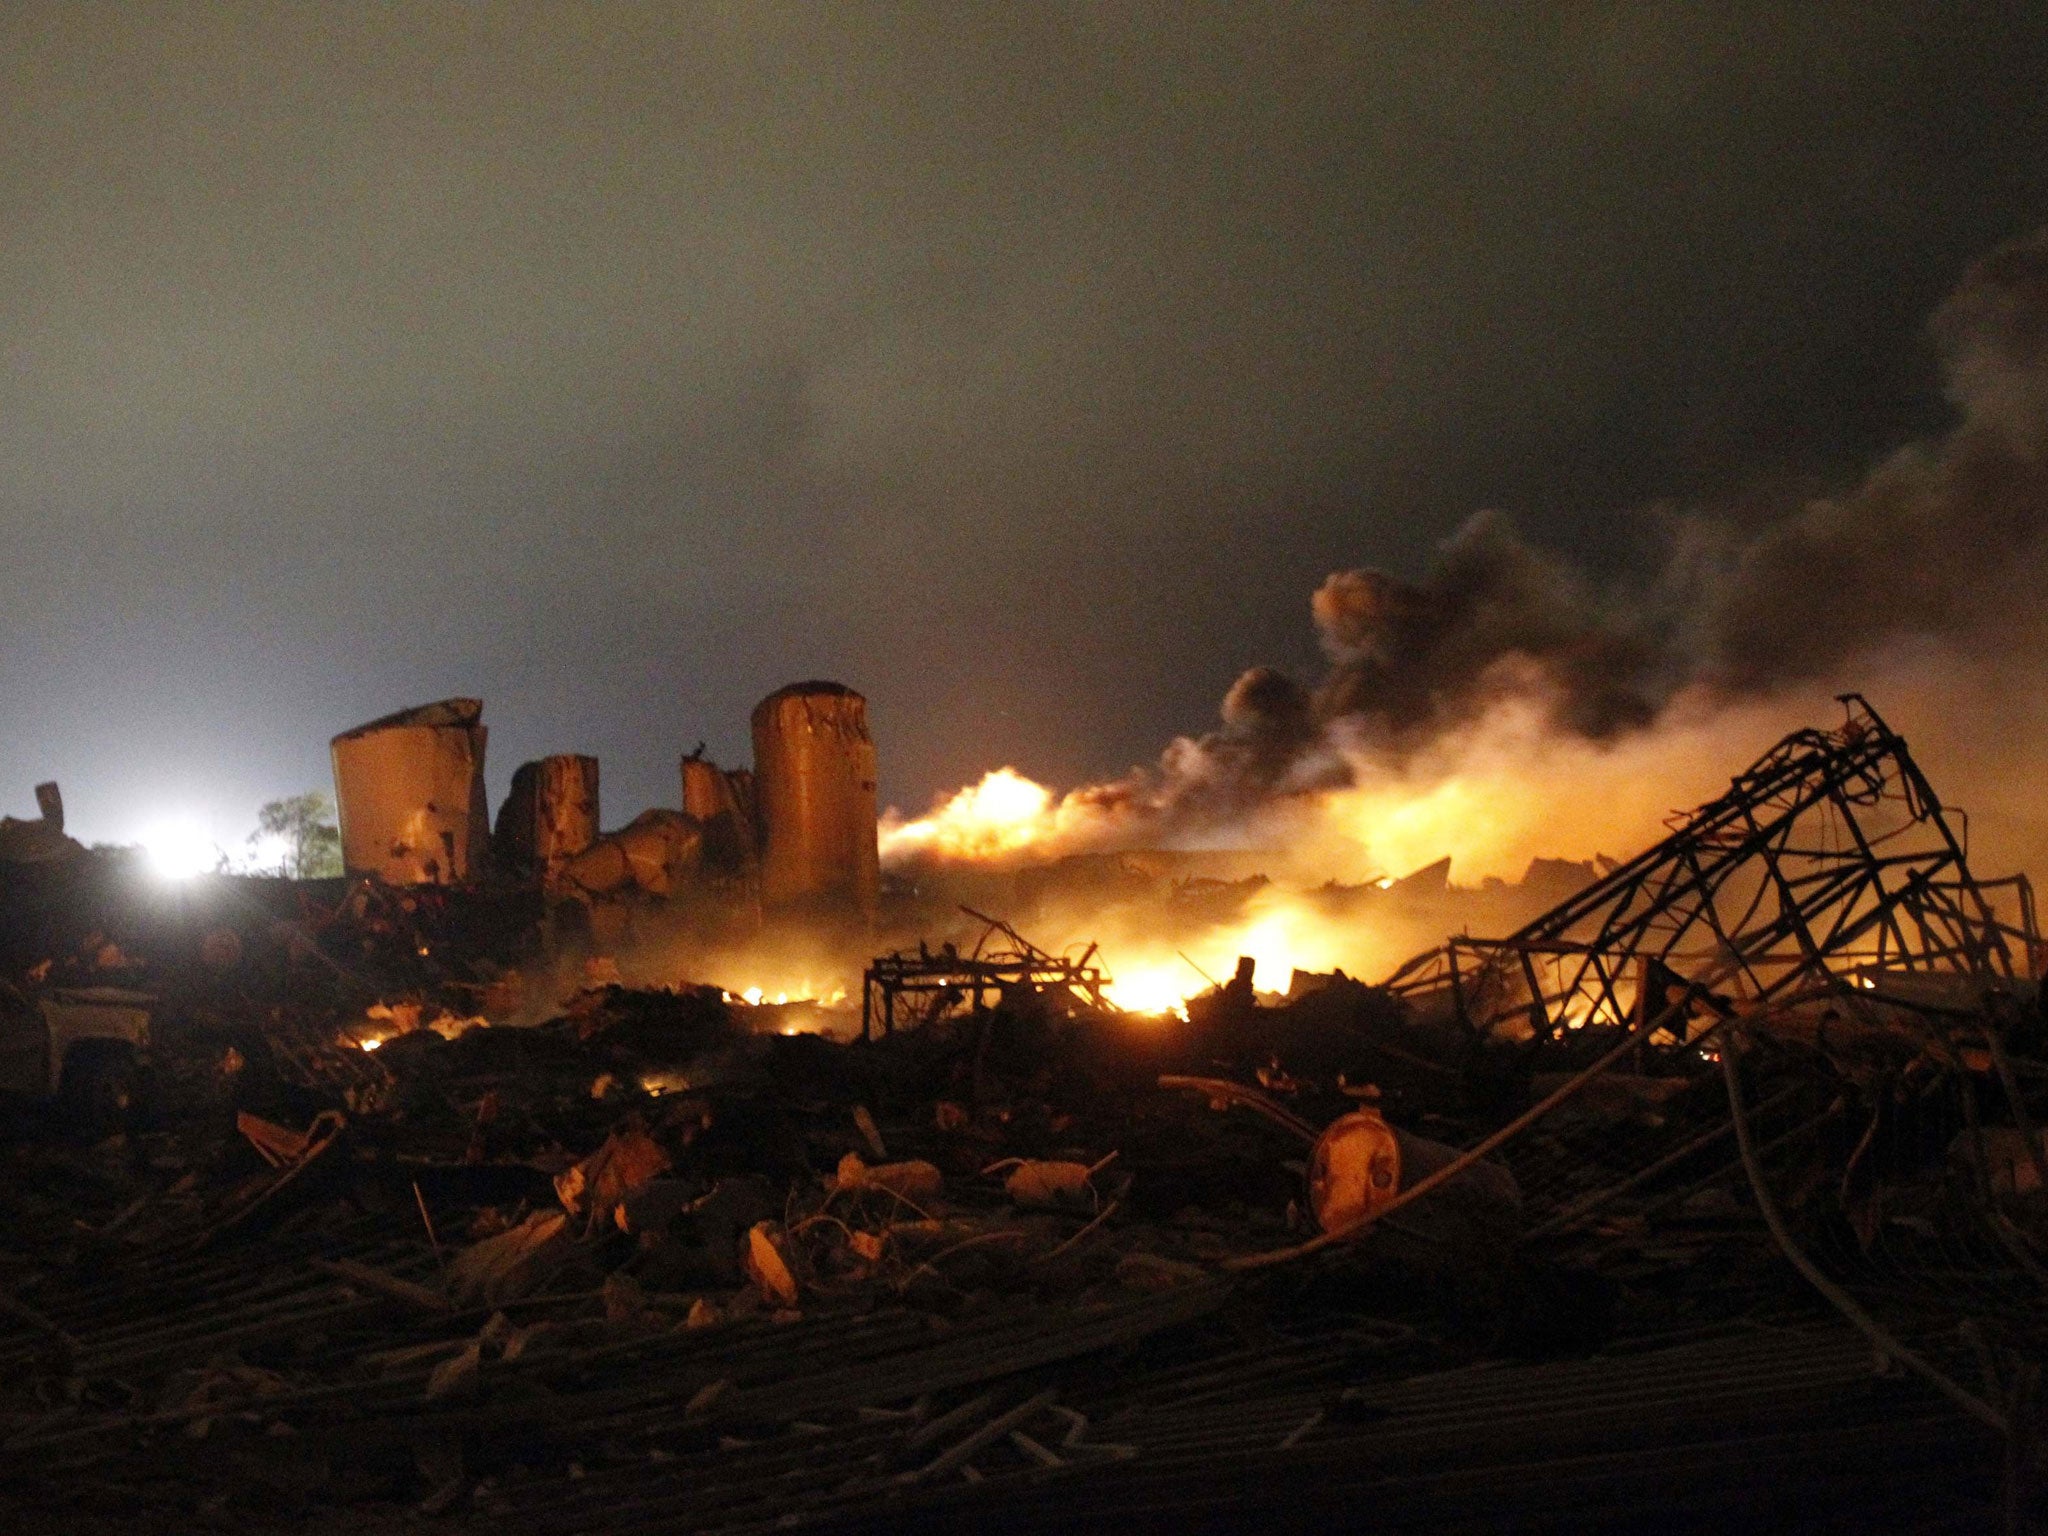 The remains of the fertilizer plant burn after the explosion at the plant in the town of West in Texas